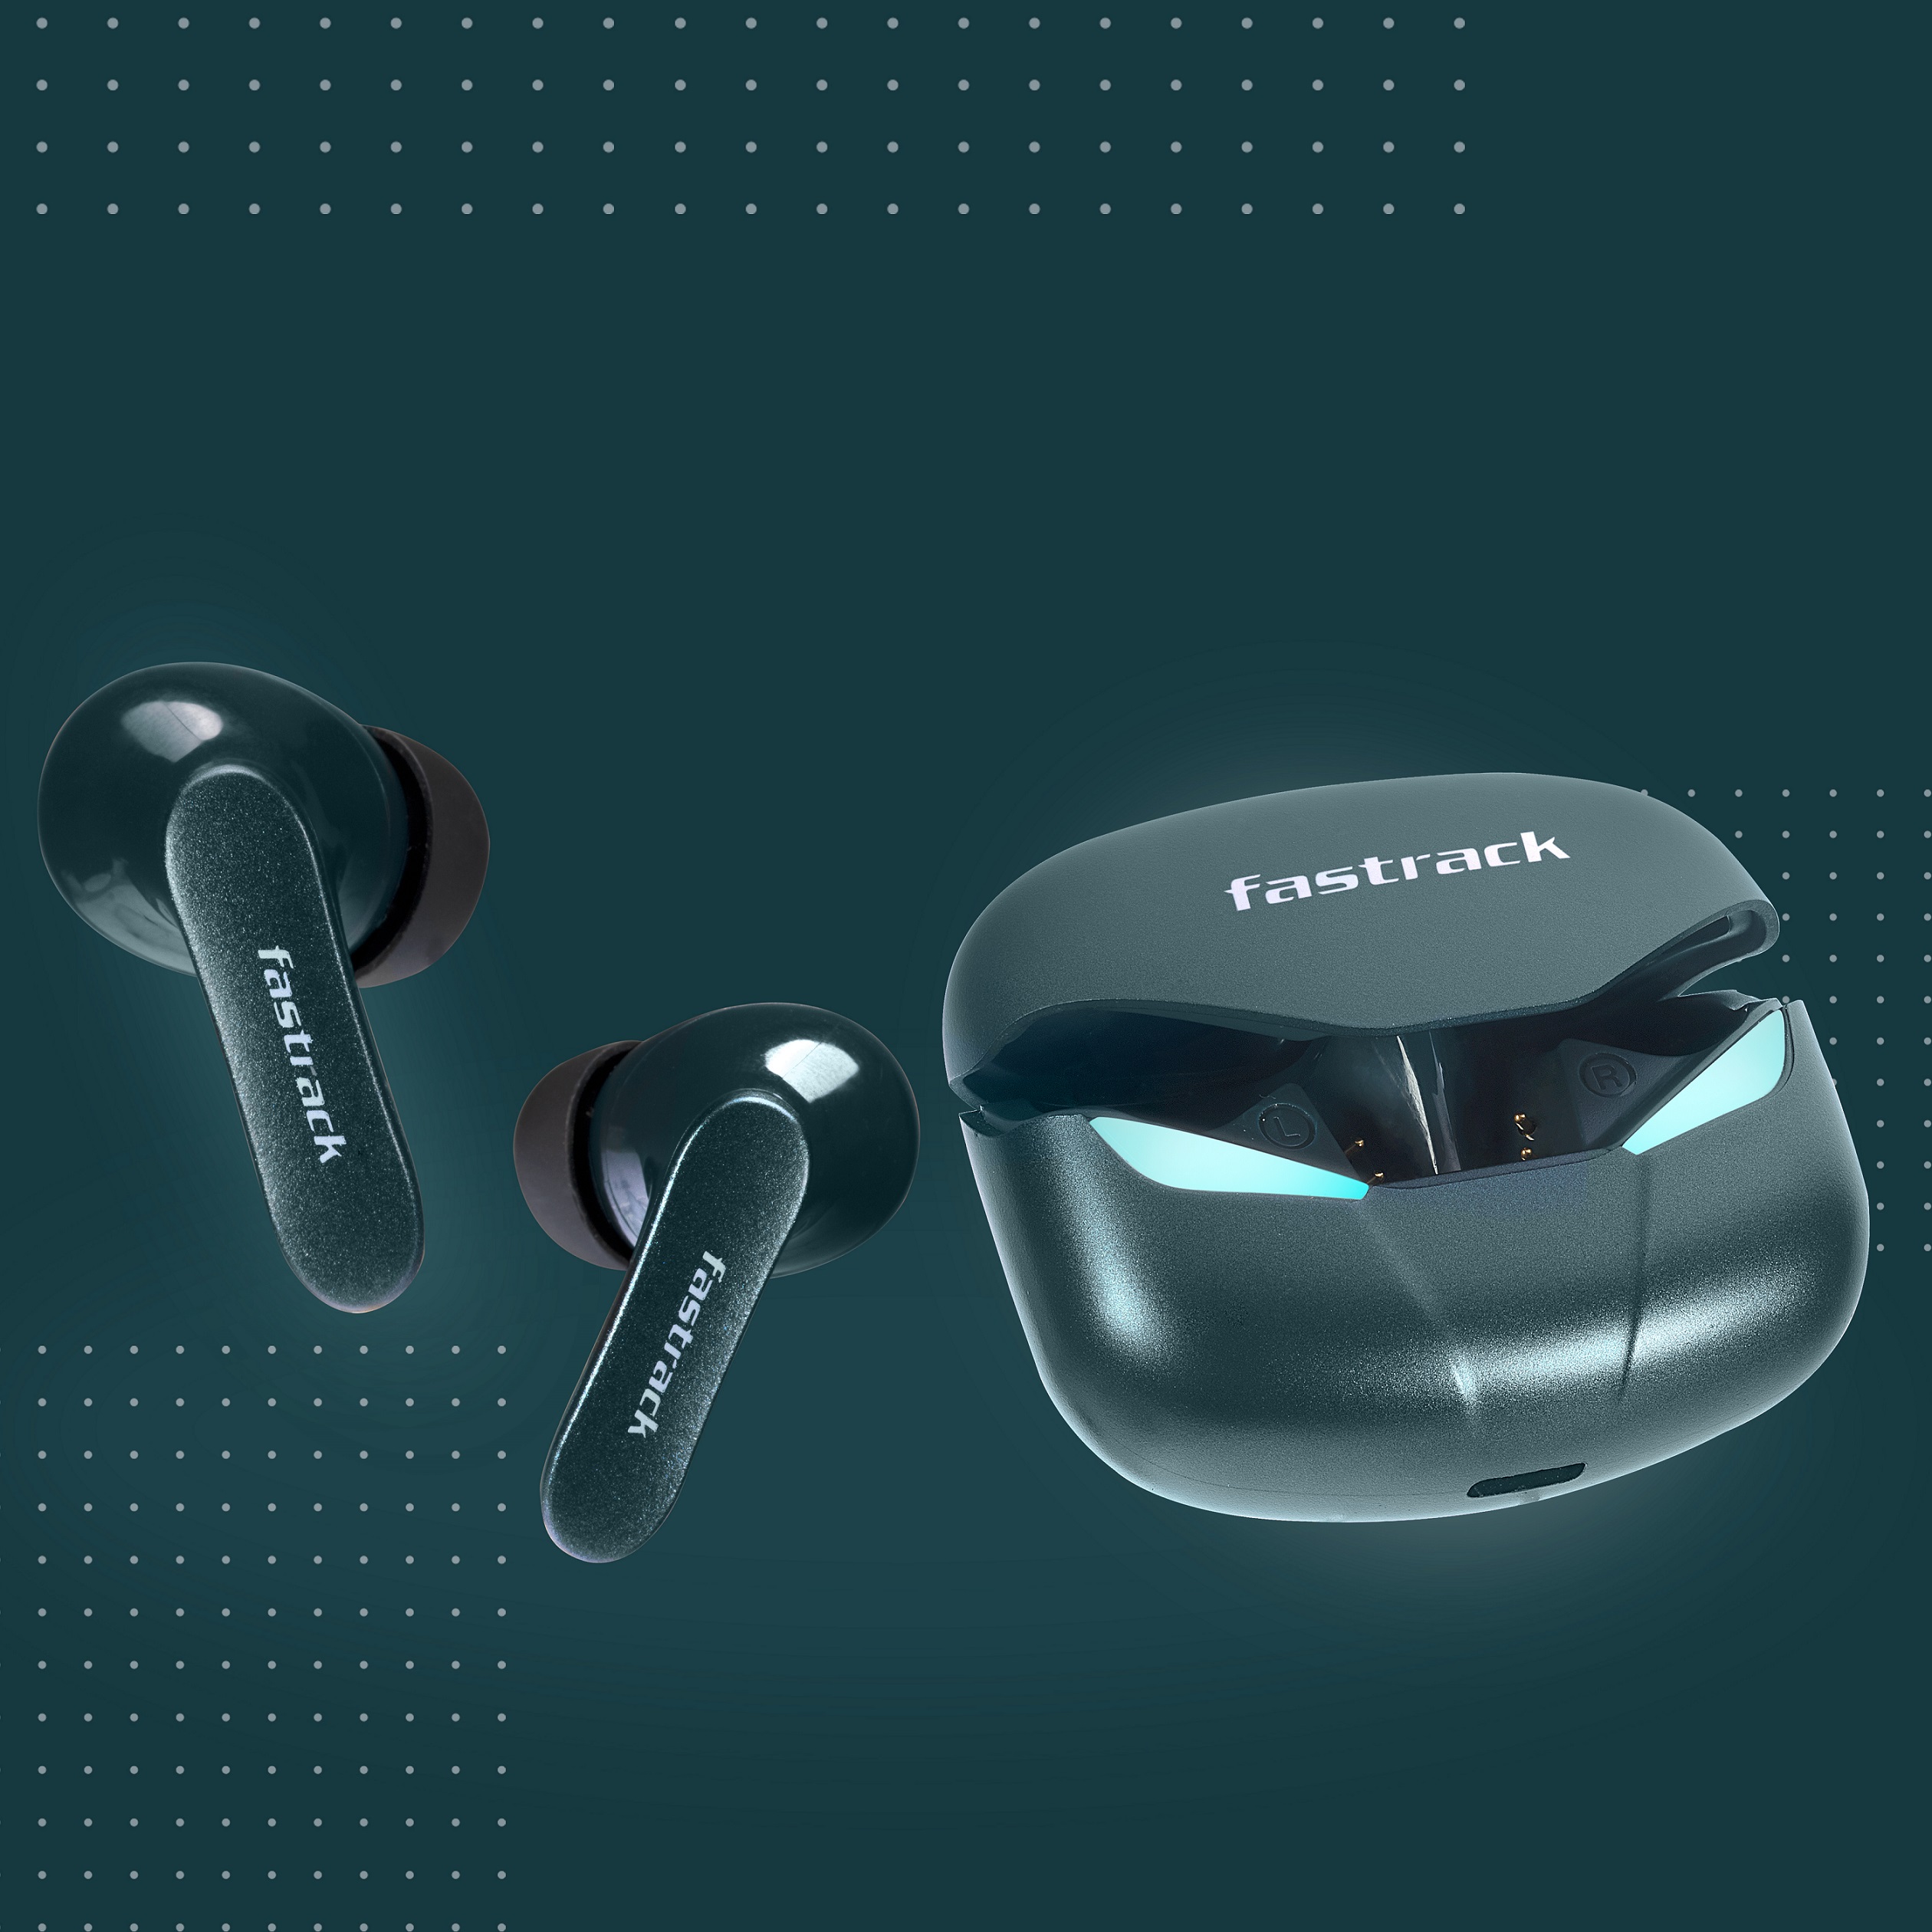 Get your groove on in absolute style with the new Fastrack Reflex Tunes